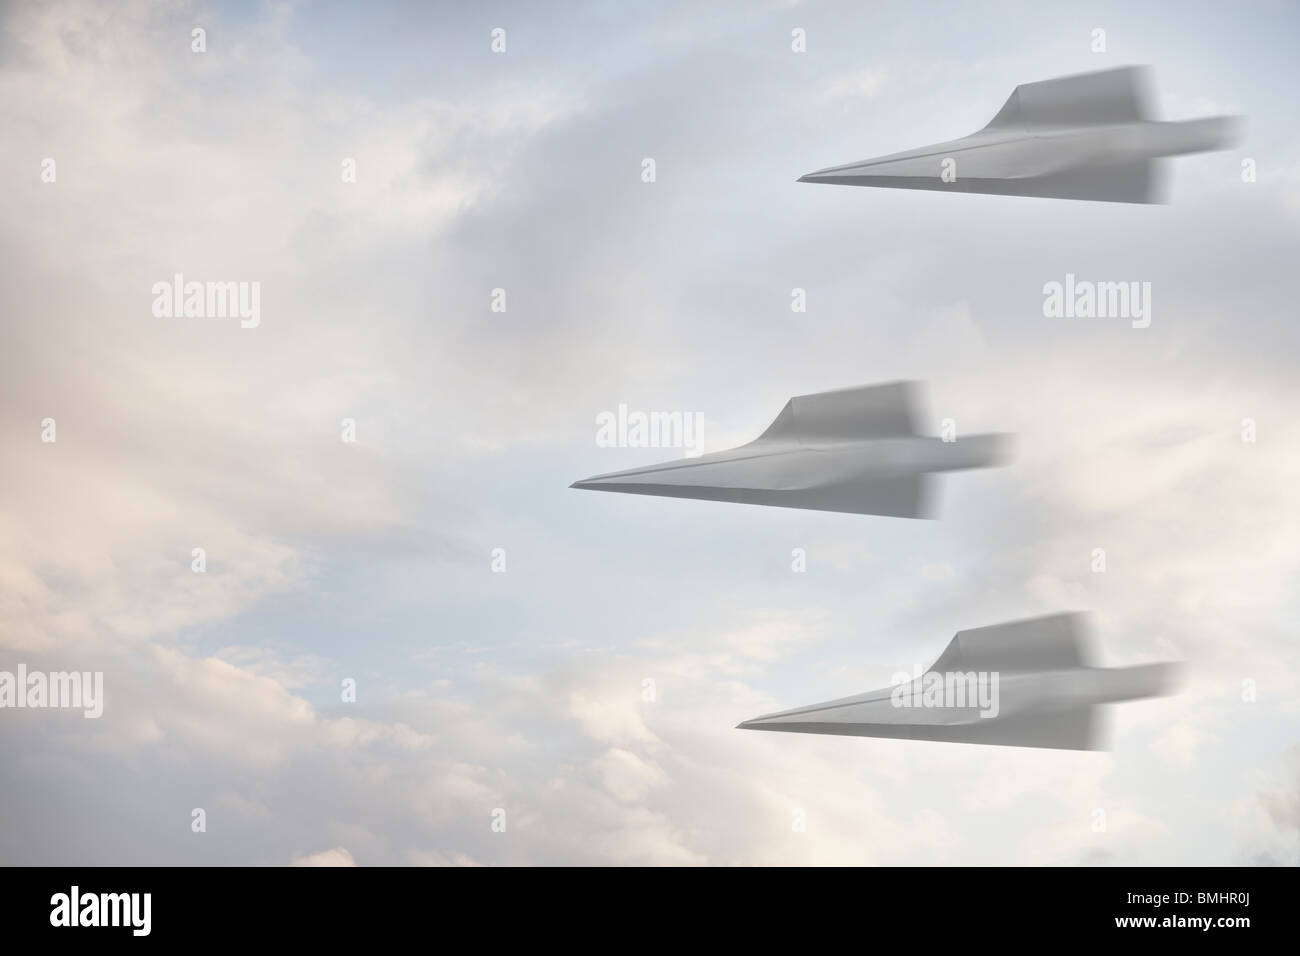 Three paper airplanes flying through the air Stock Photo